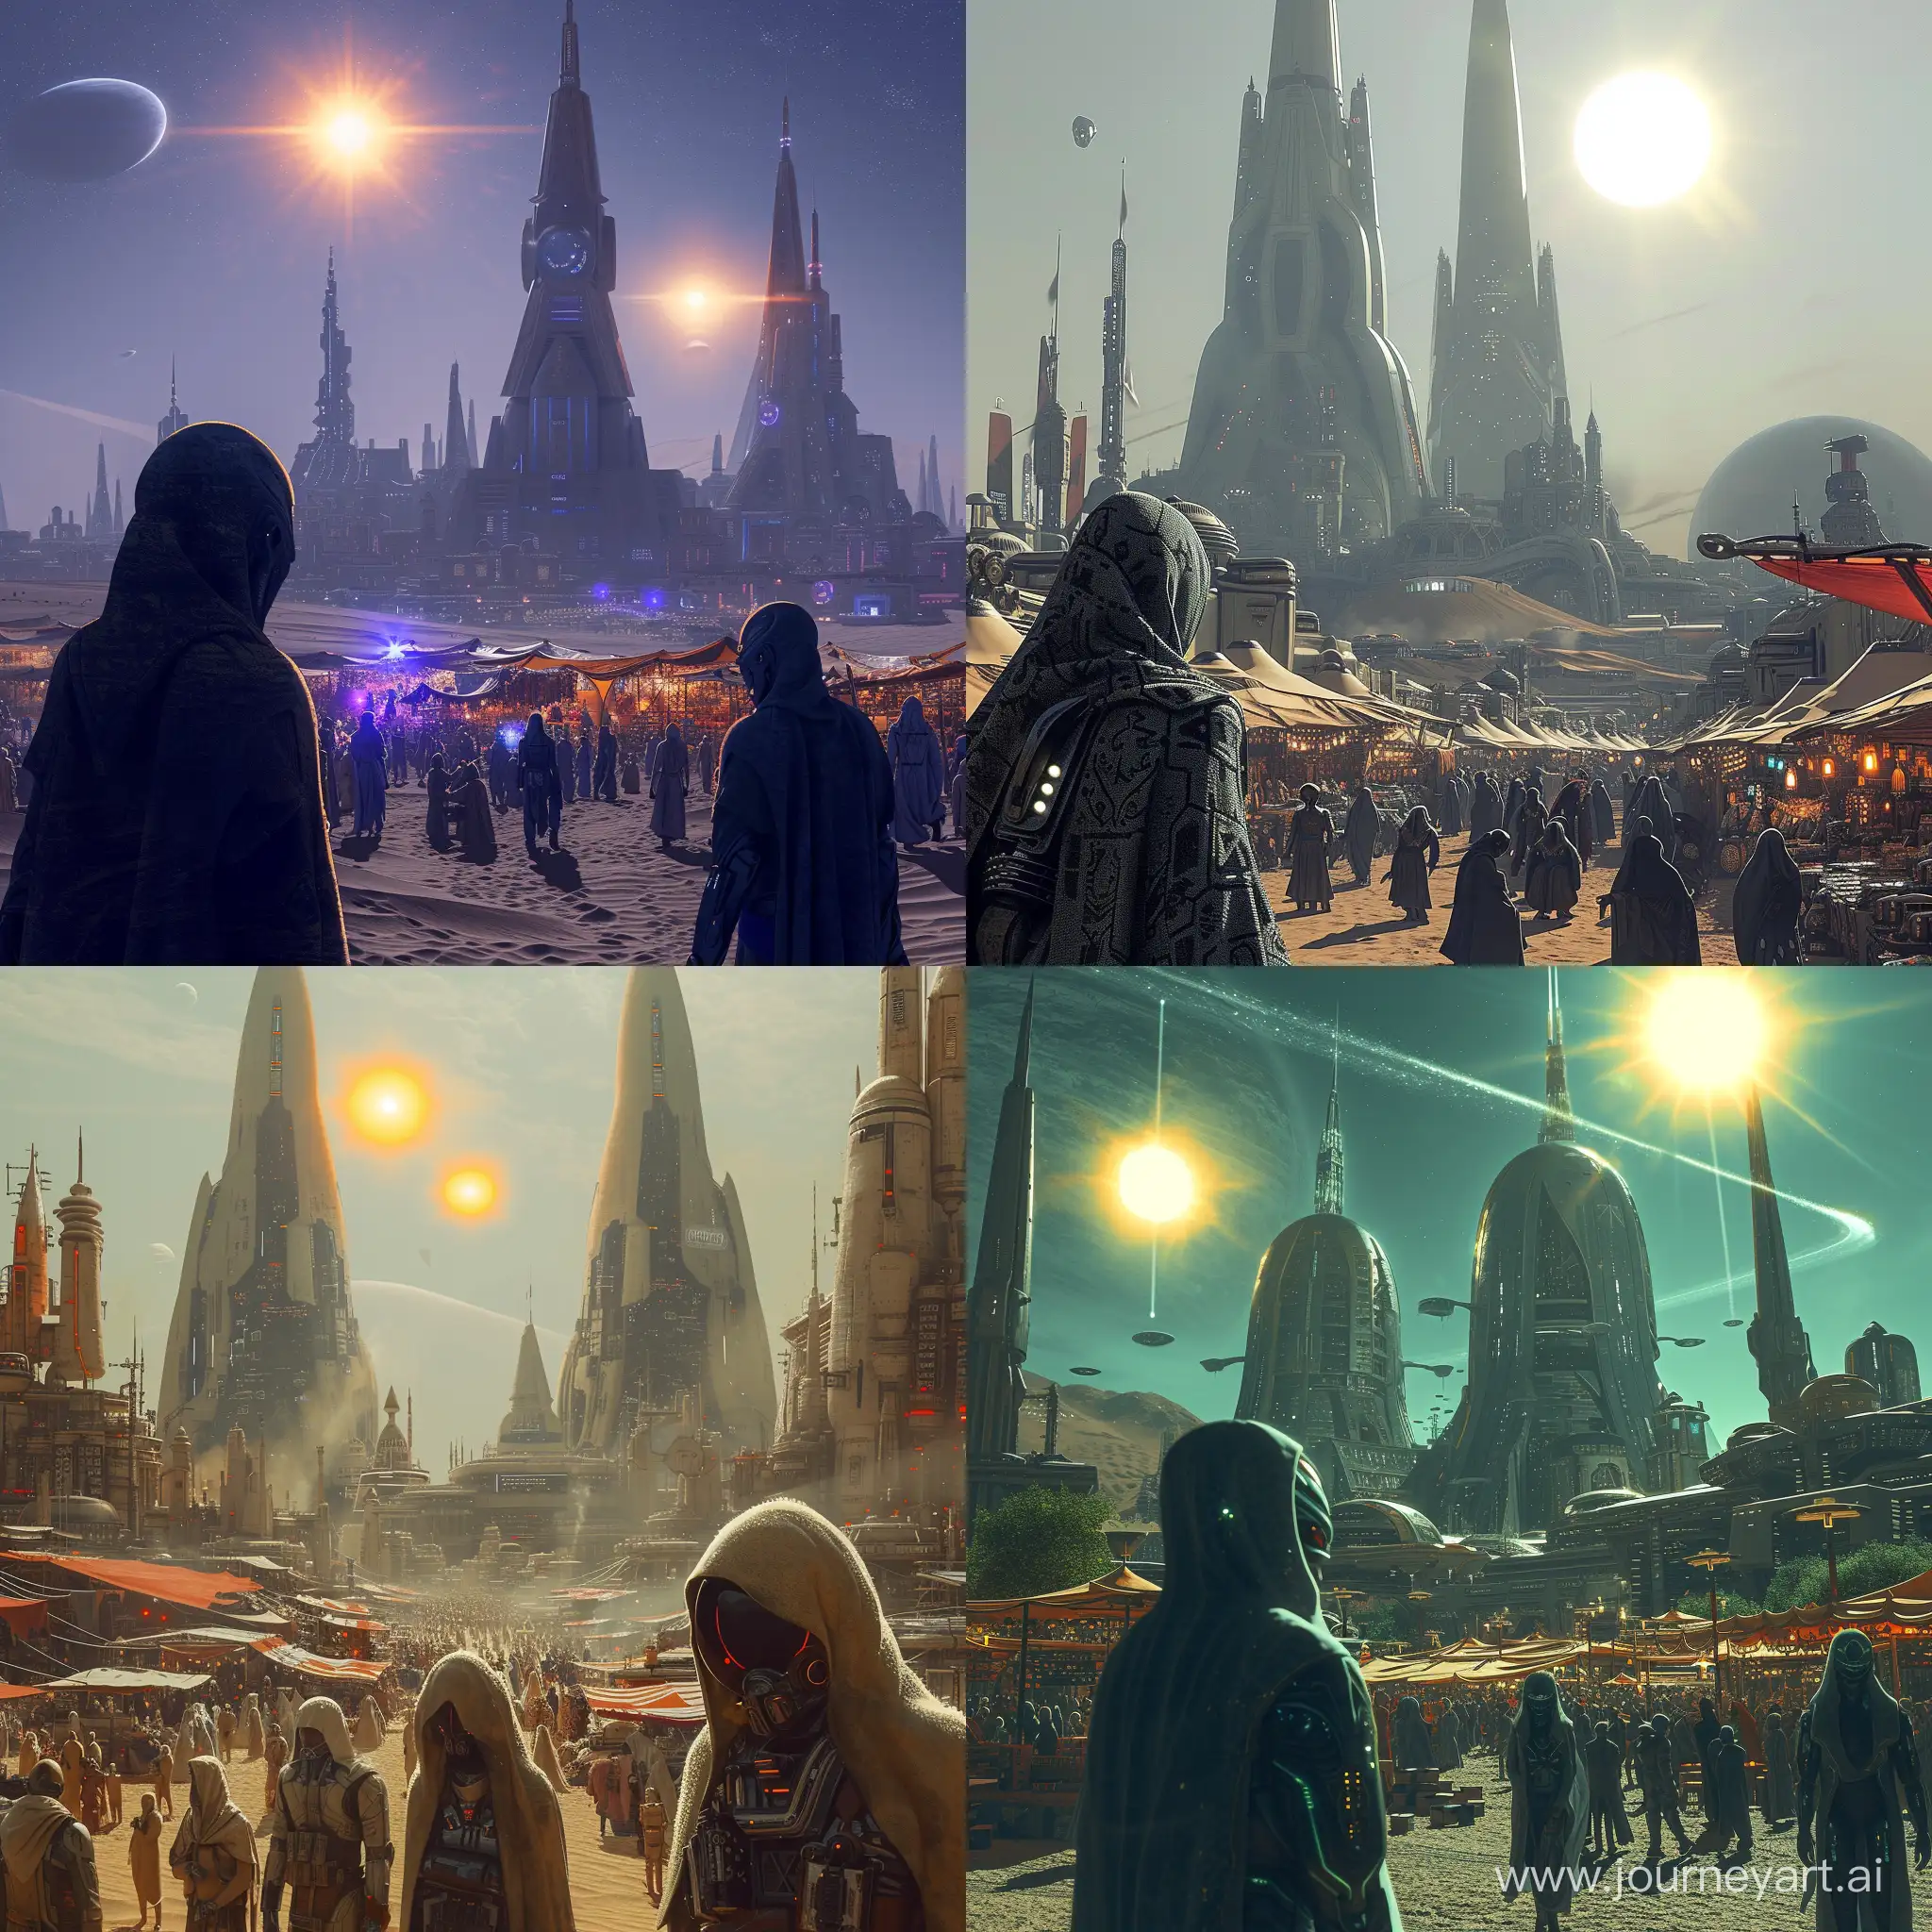 Alien bazaar on a desert planet with arabic vibes, but high level of technology. Giant sci-fi buildings are seen in the background. Two suns are shining brightly. Aliens are tall humanoids with hoods and/or helmets